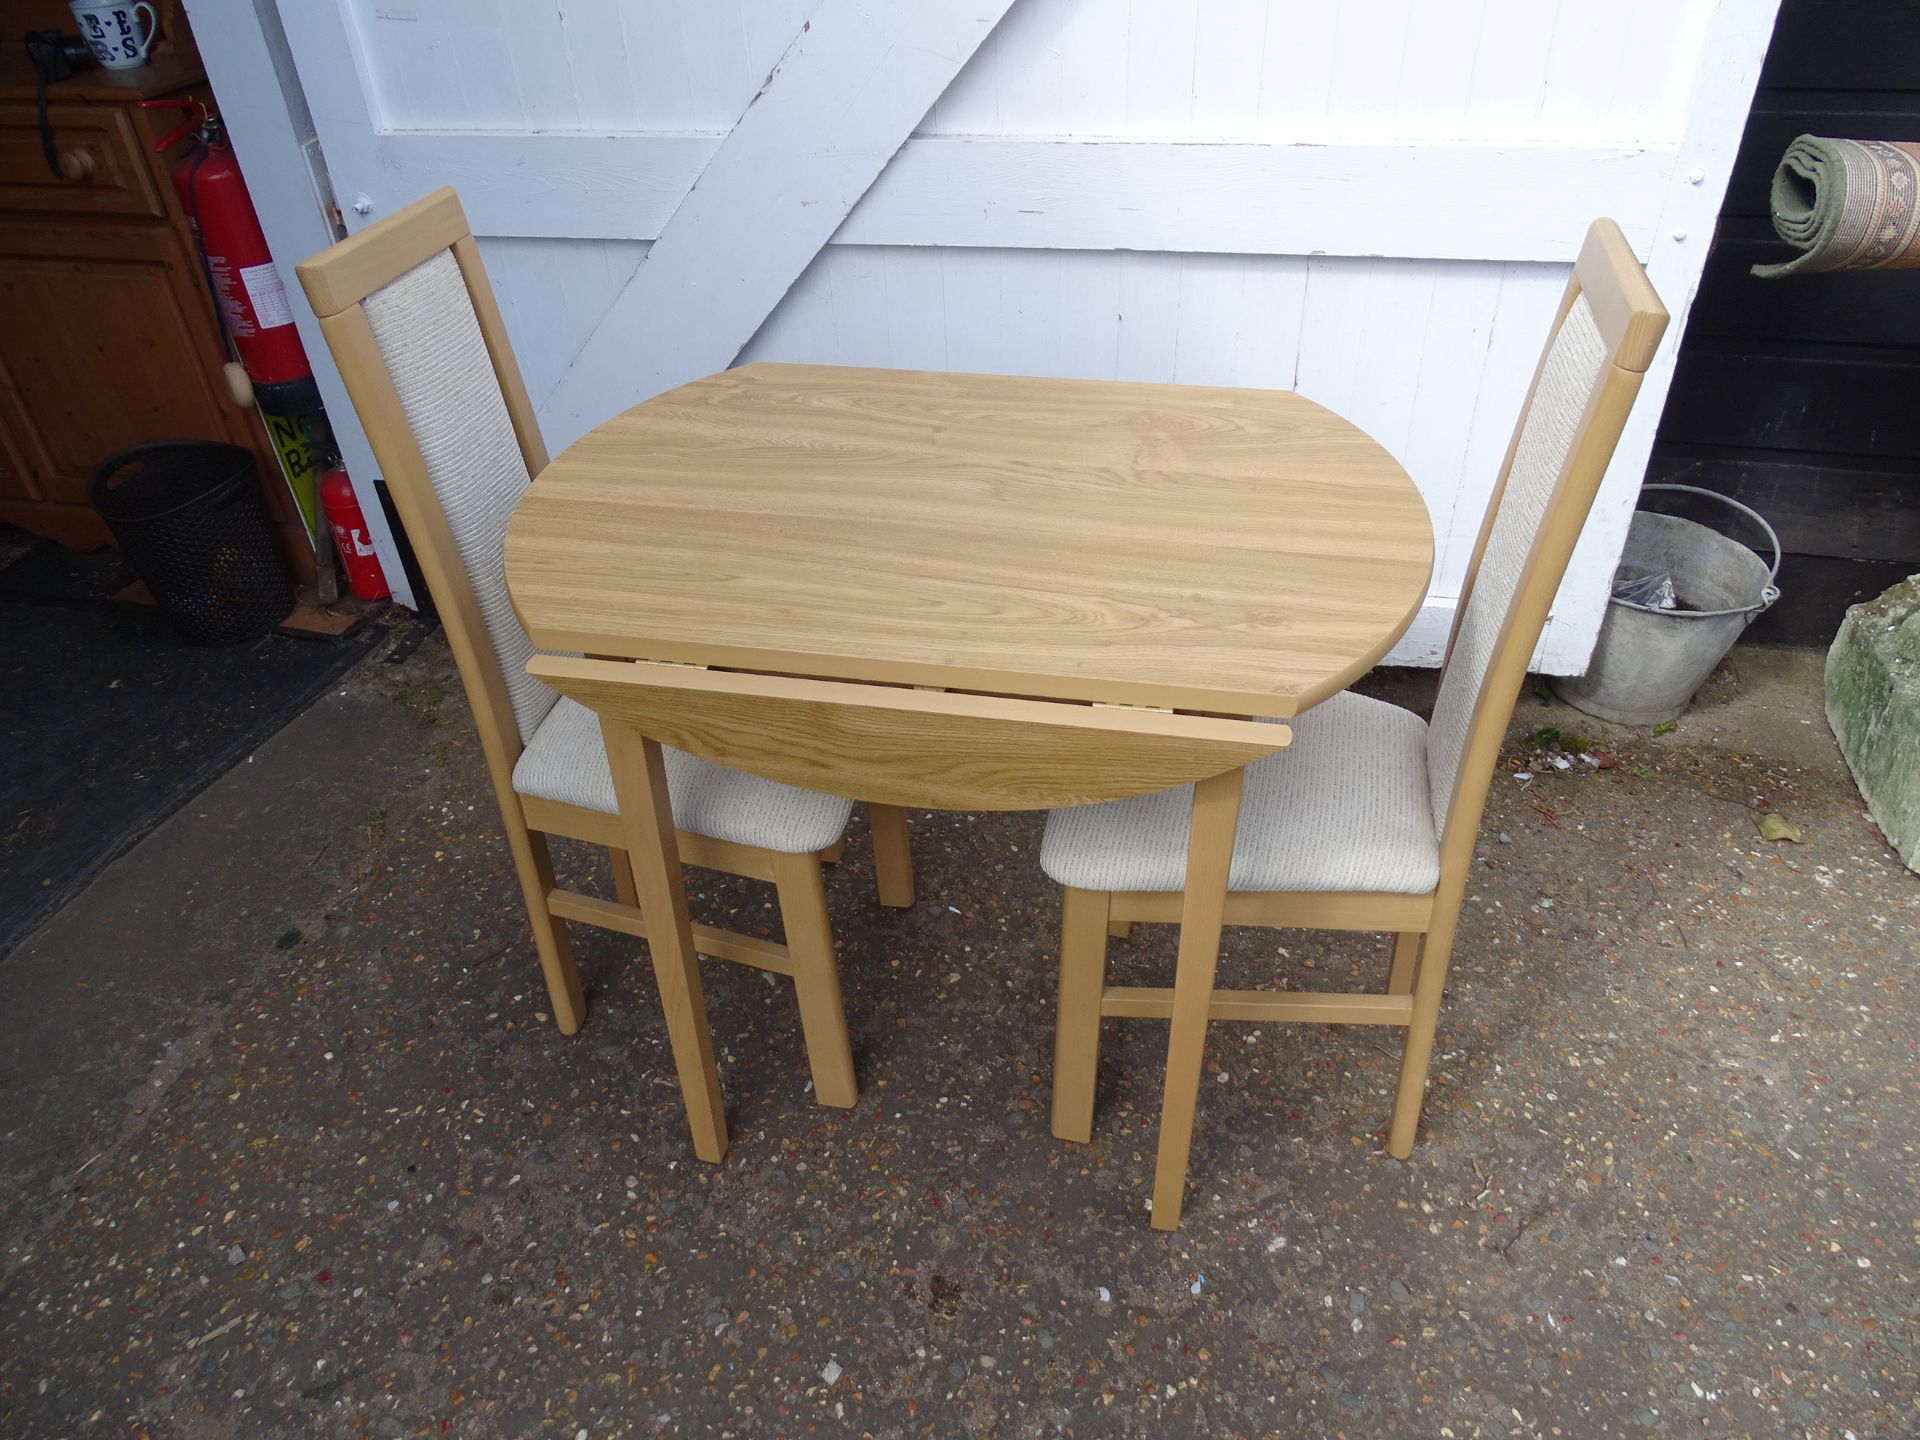 Drop leaf kitchen table with 2 upholstered chairs